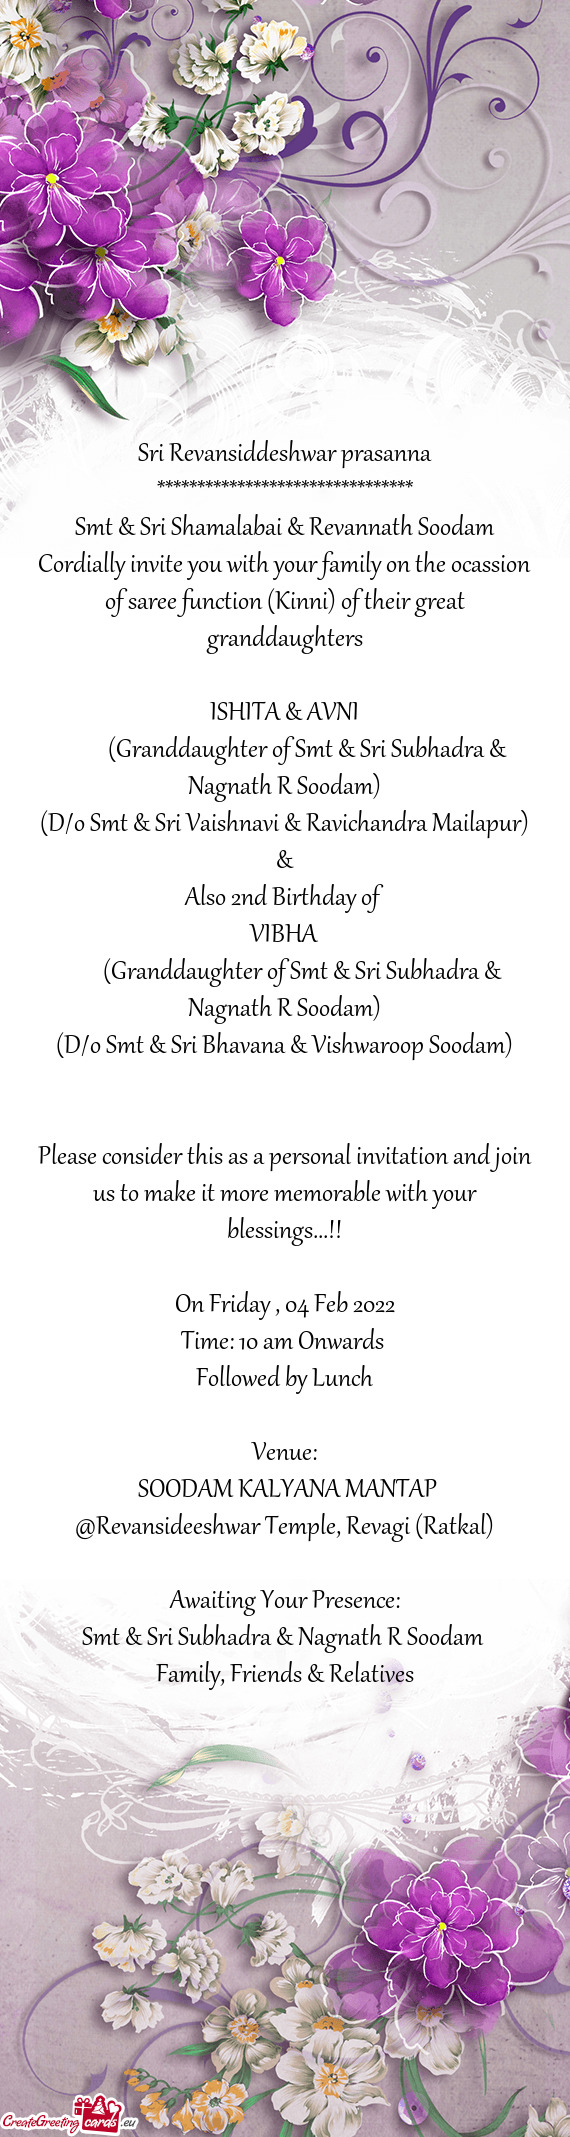 Cordially invite you with your family on the ocassion of saree function (Kinni) of their great grand